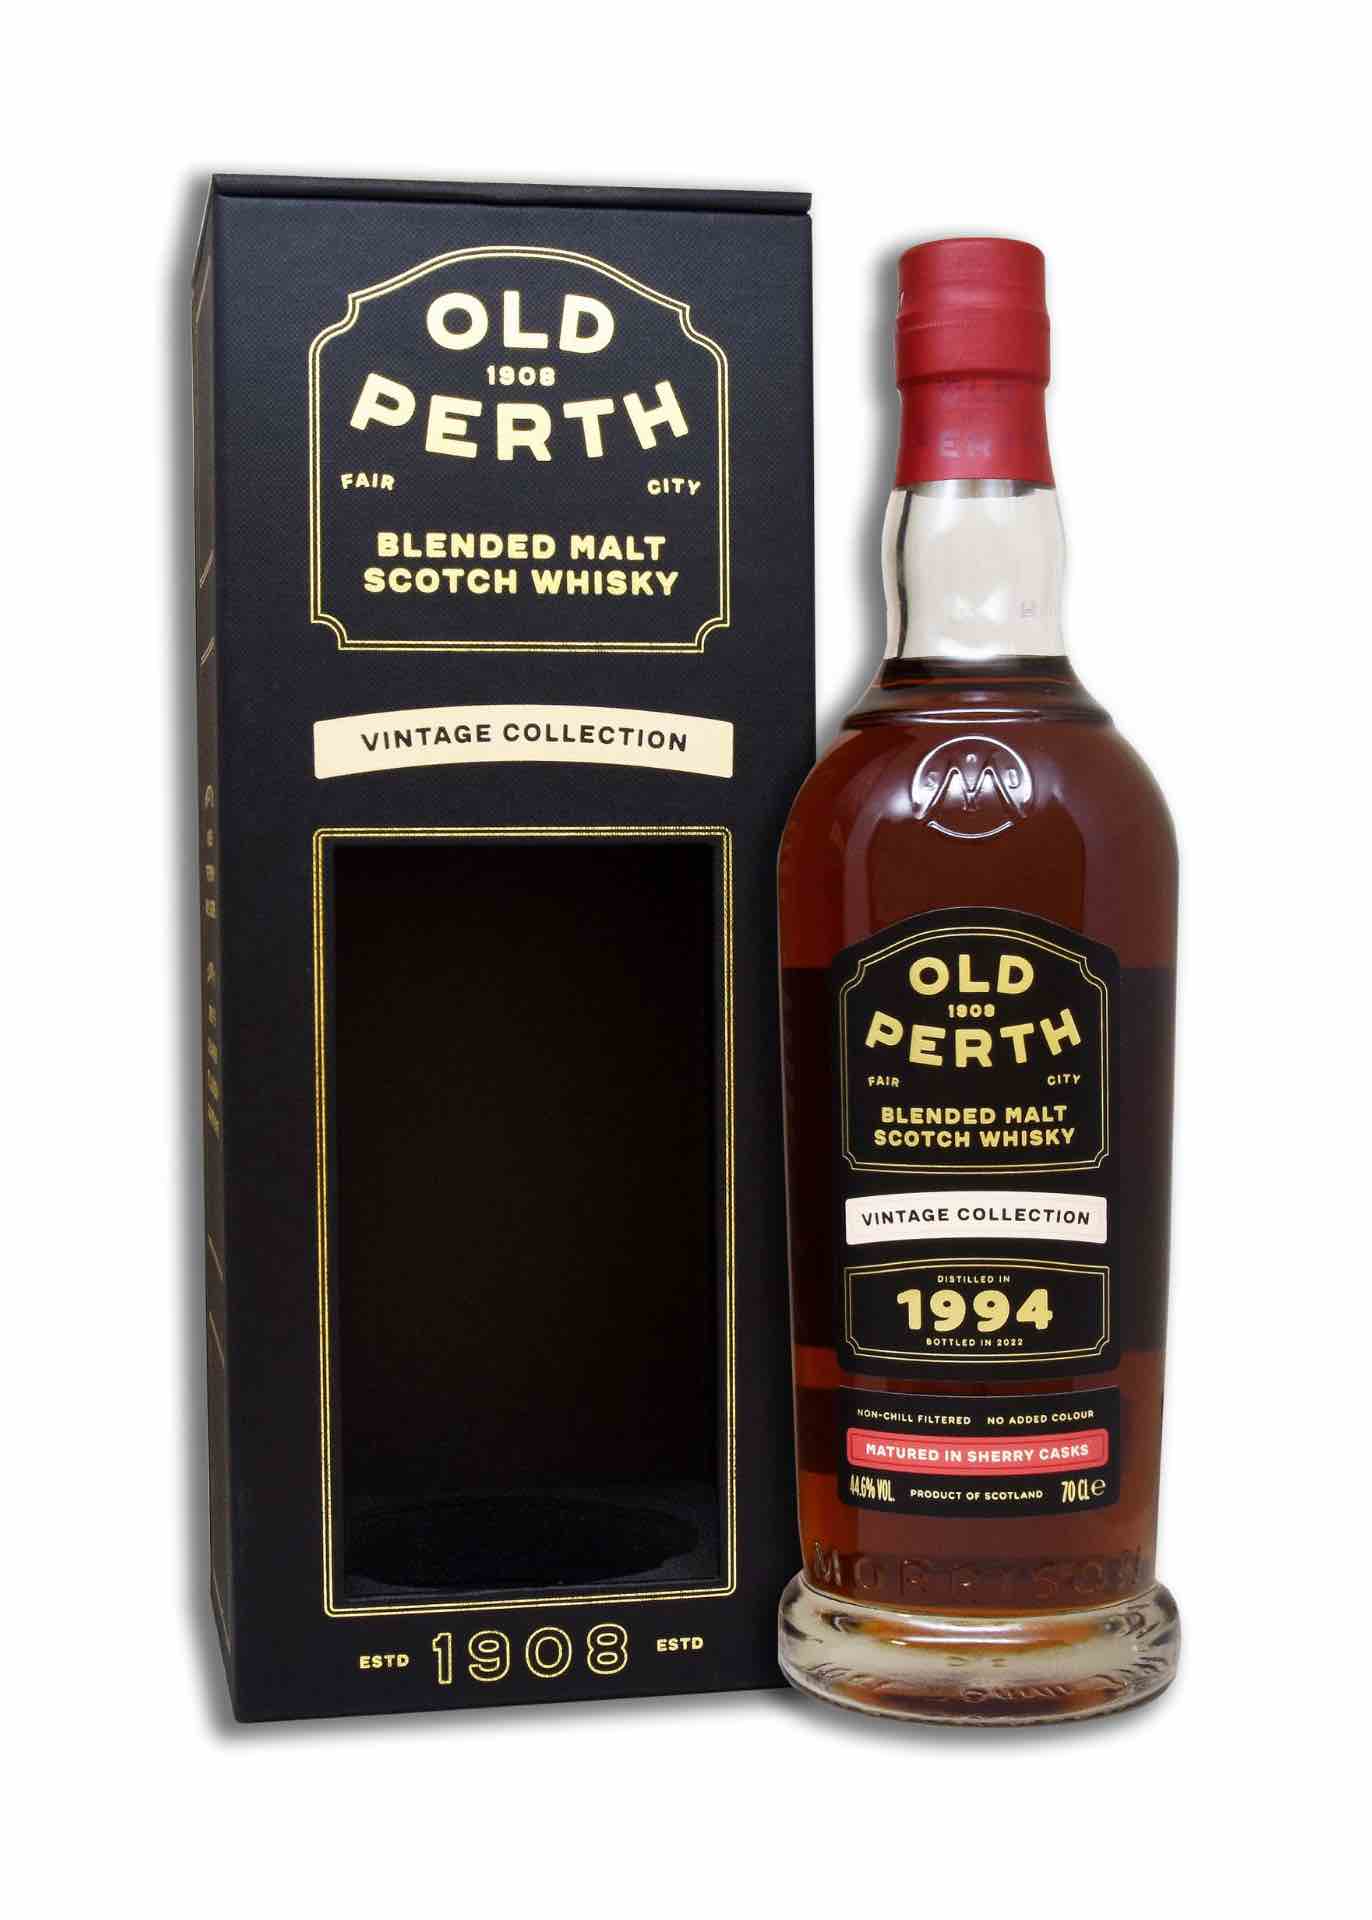 Old Perth Vintage 1994 Sherry Cask Whisky